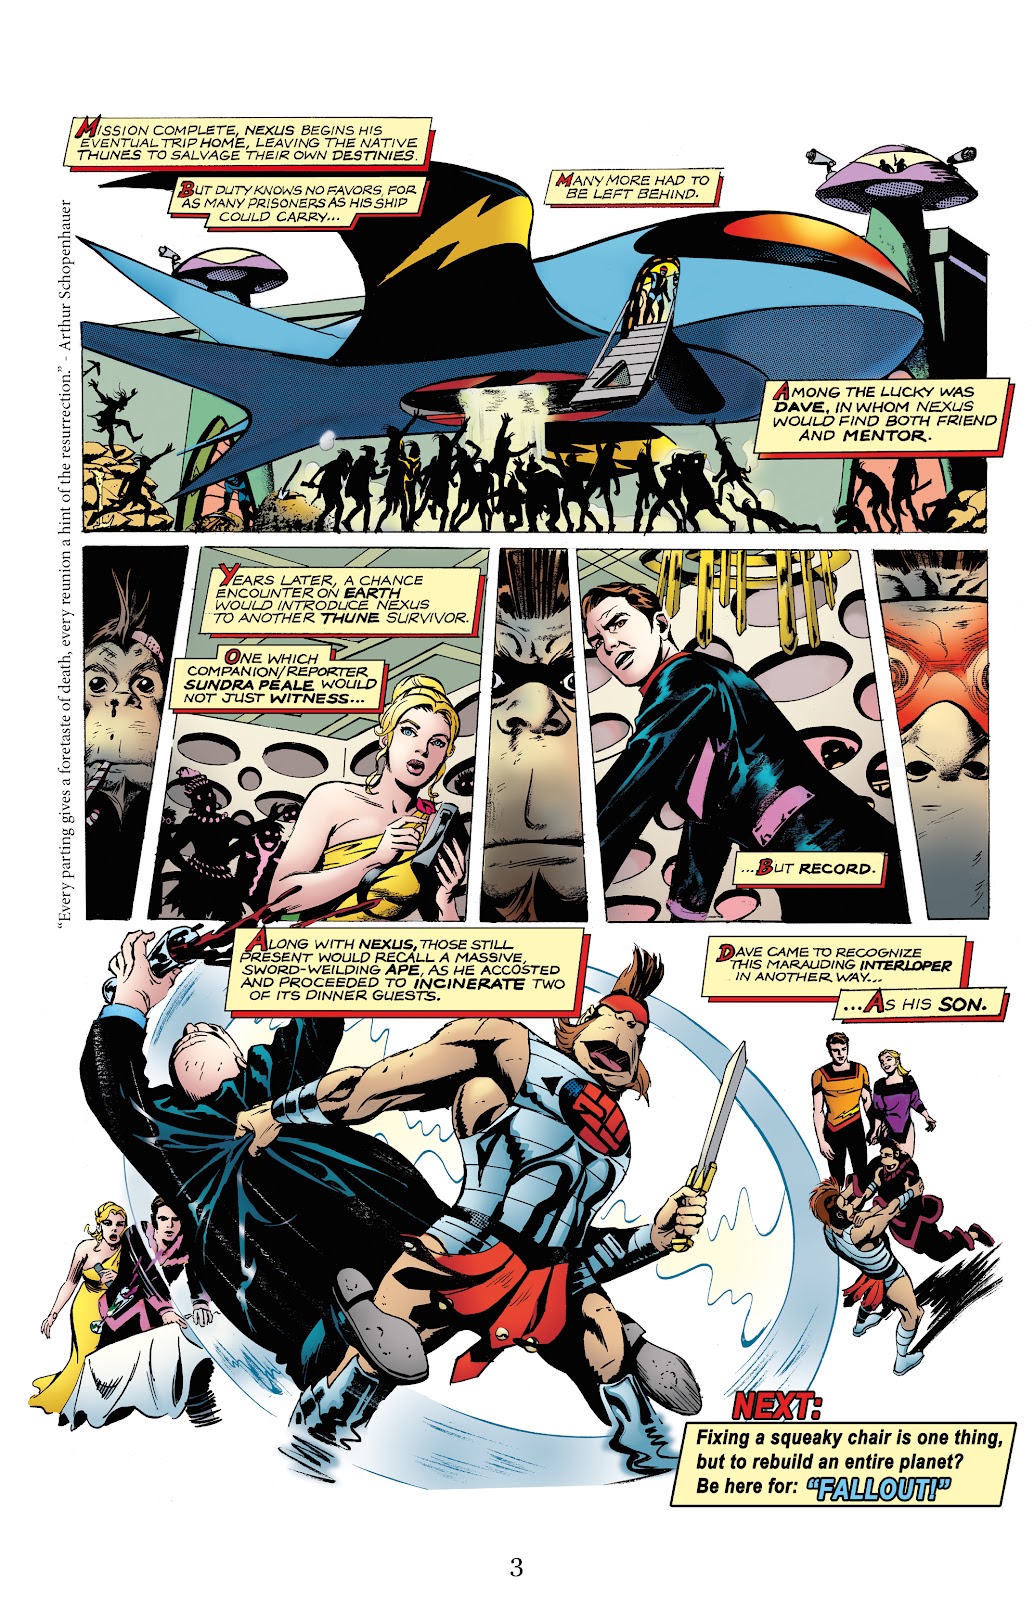 Nexus Newspaper Strips Vol 2: The Battle For Thuneworld issue 1 - Page 5